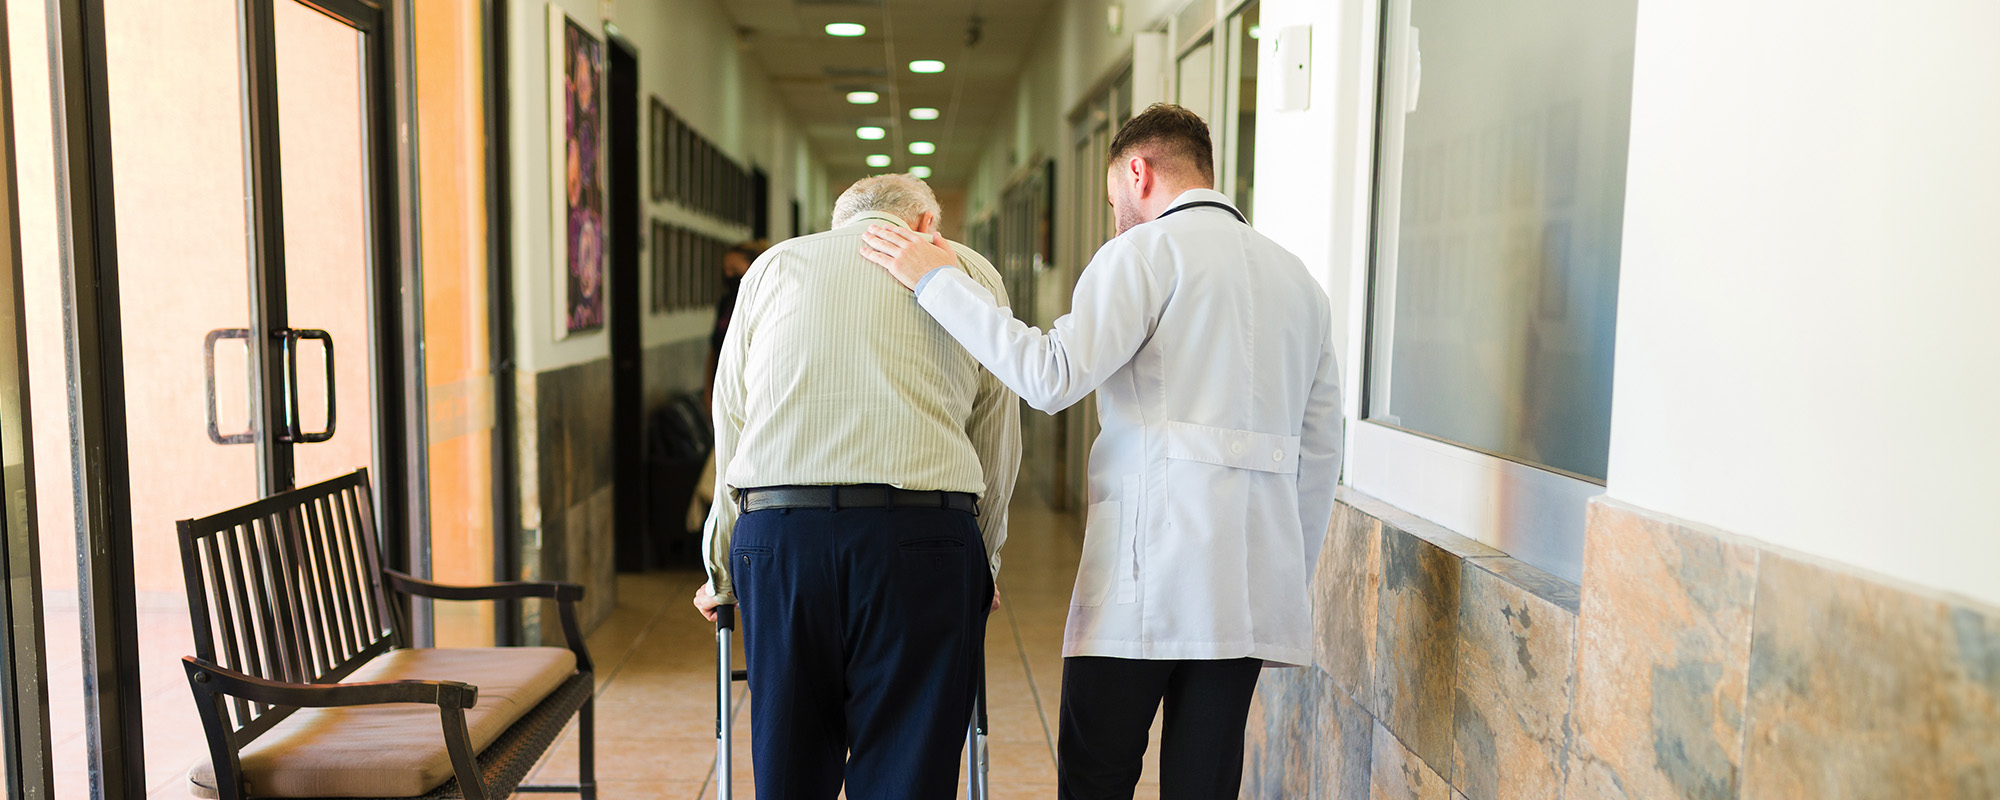 doctor and retired mature man taking a walk at the retirement home